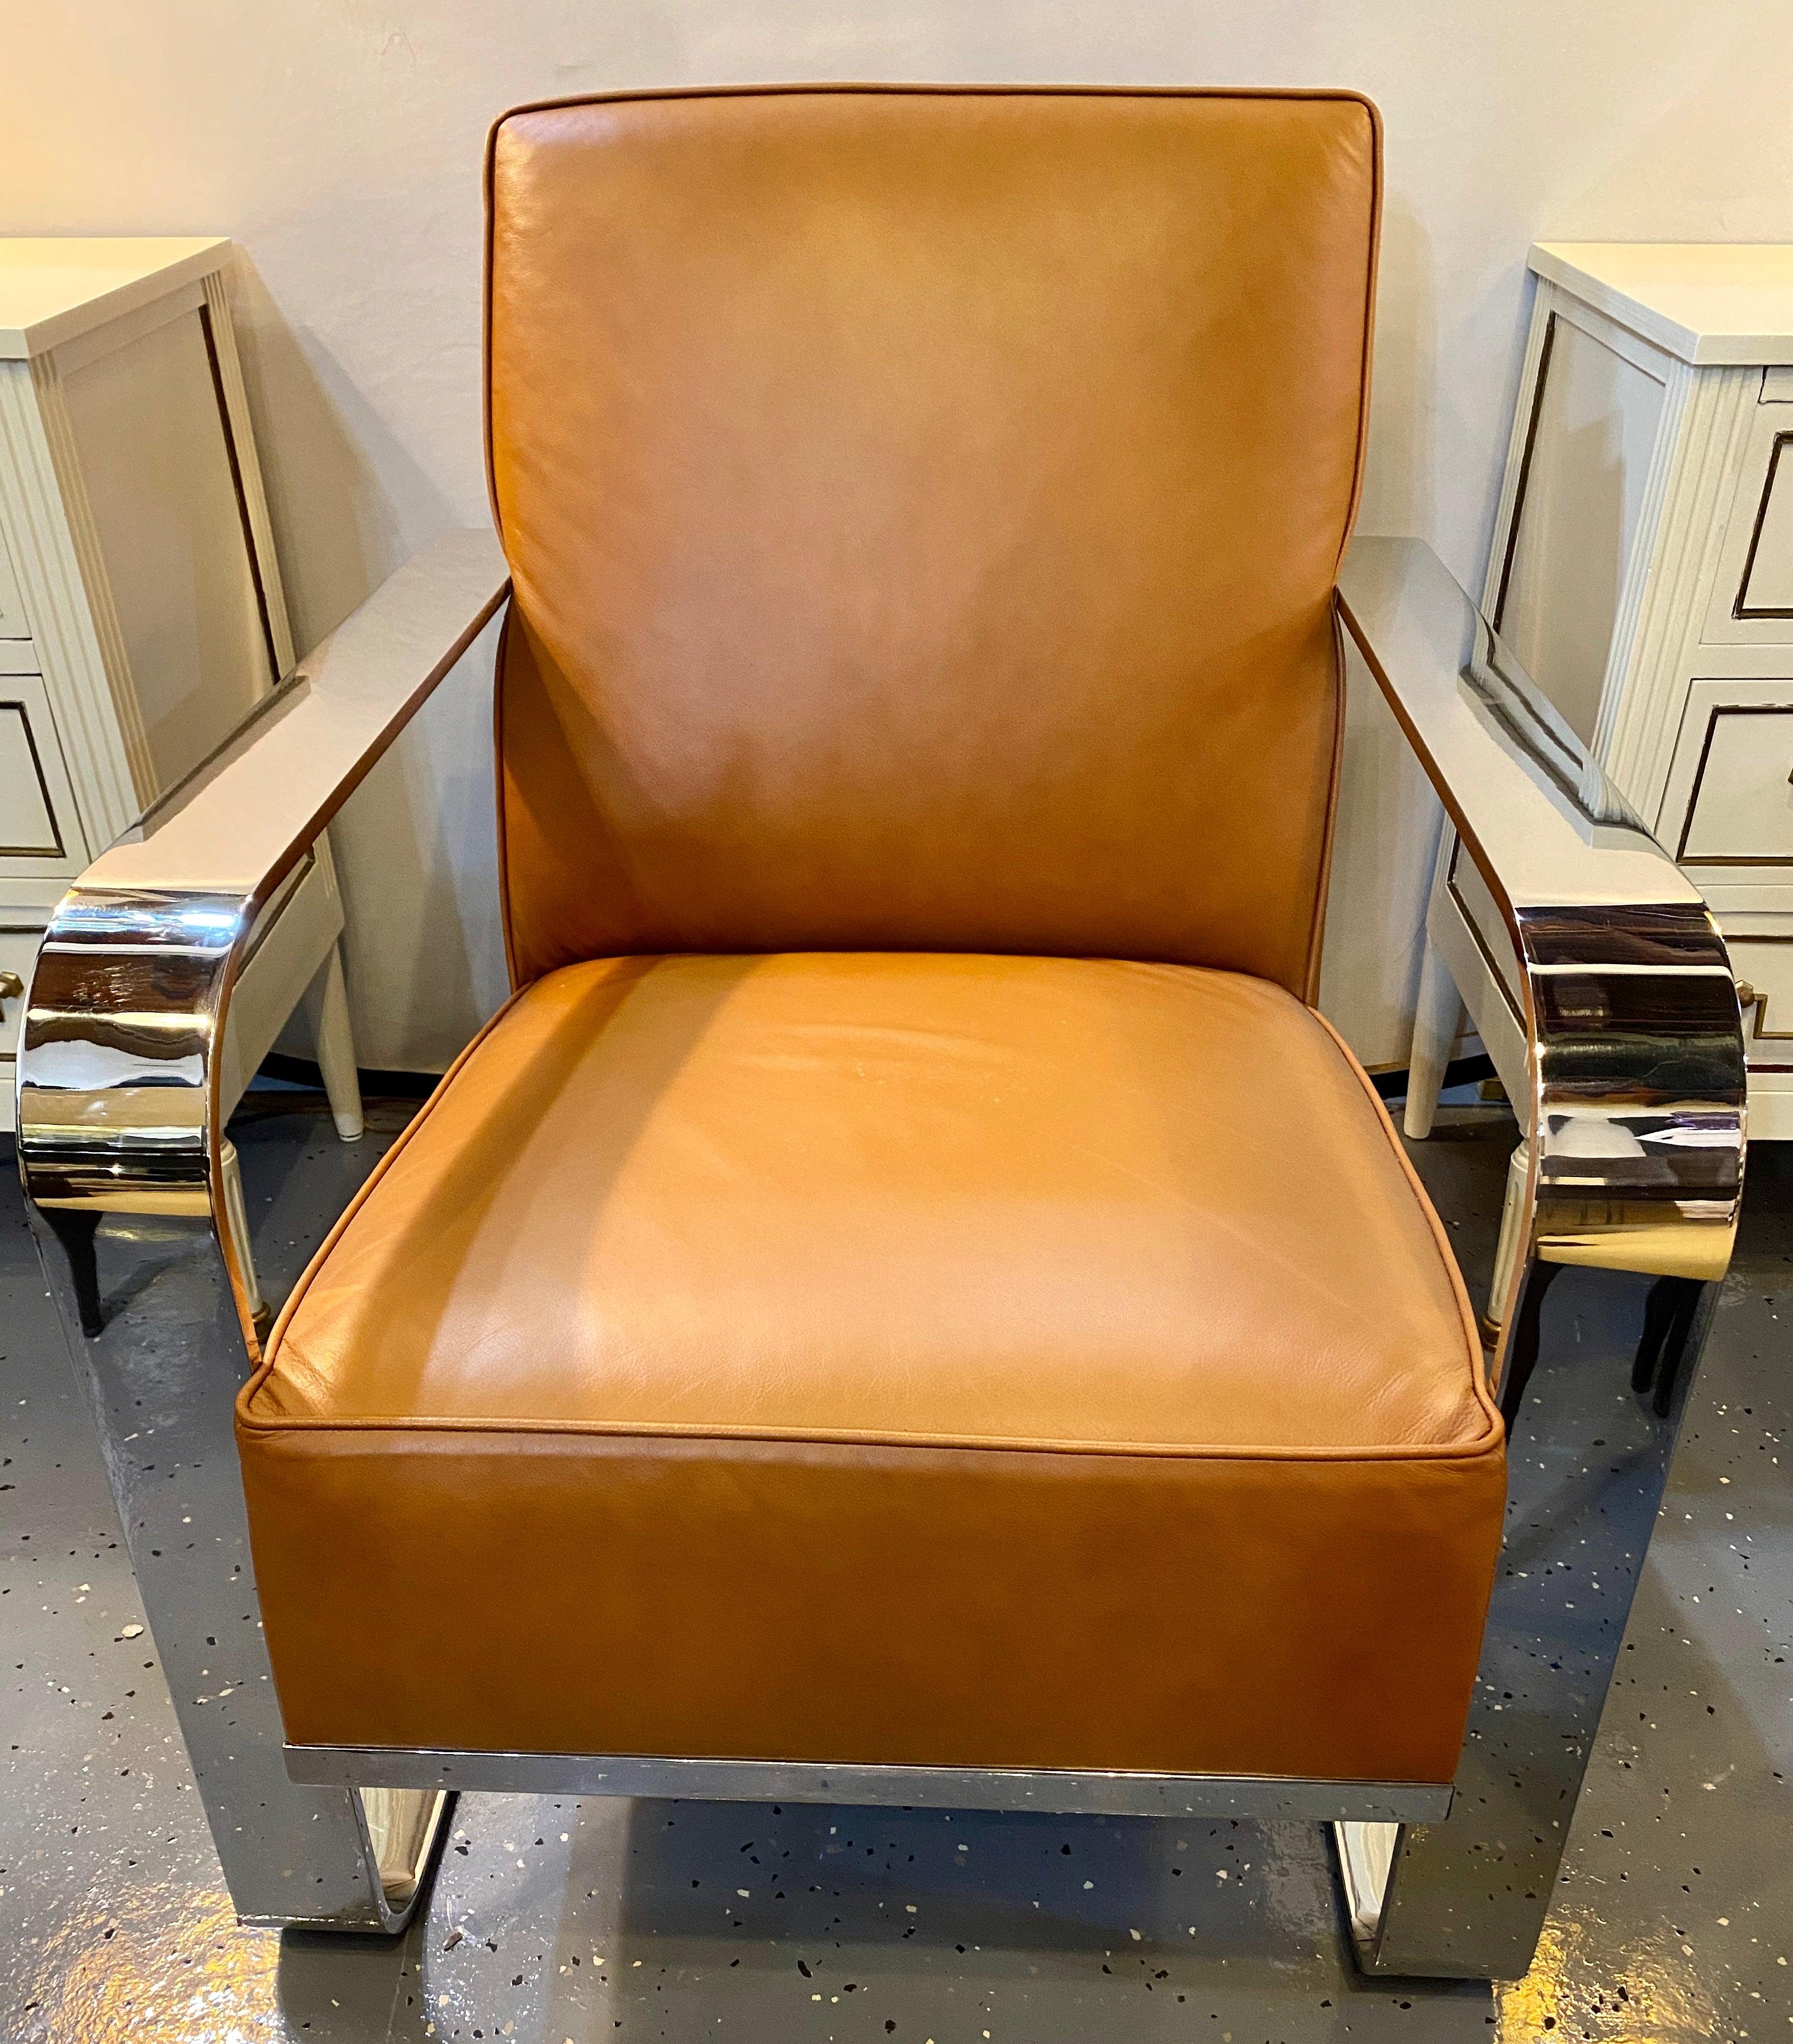 Ralph Lauren bohemian chairs chrome and leather rockers. A pair of Ralph Lauren lounge chairs with heavy chrome detailing in the arms, legs and the back. Beautiful high grade distressed brown leather. Very comfortable with a slight bounce like a